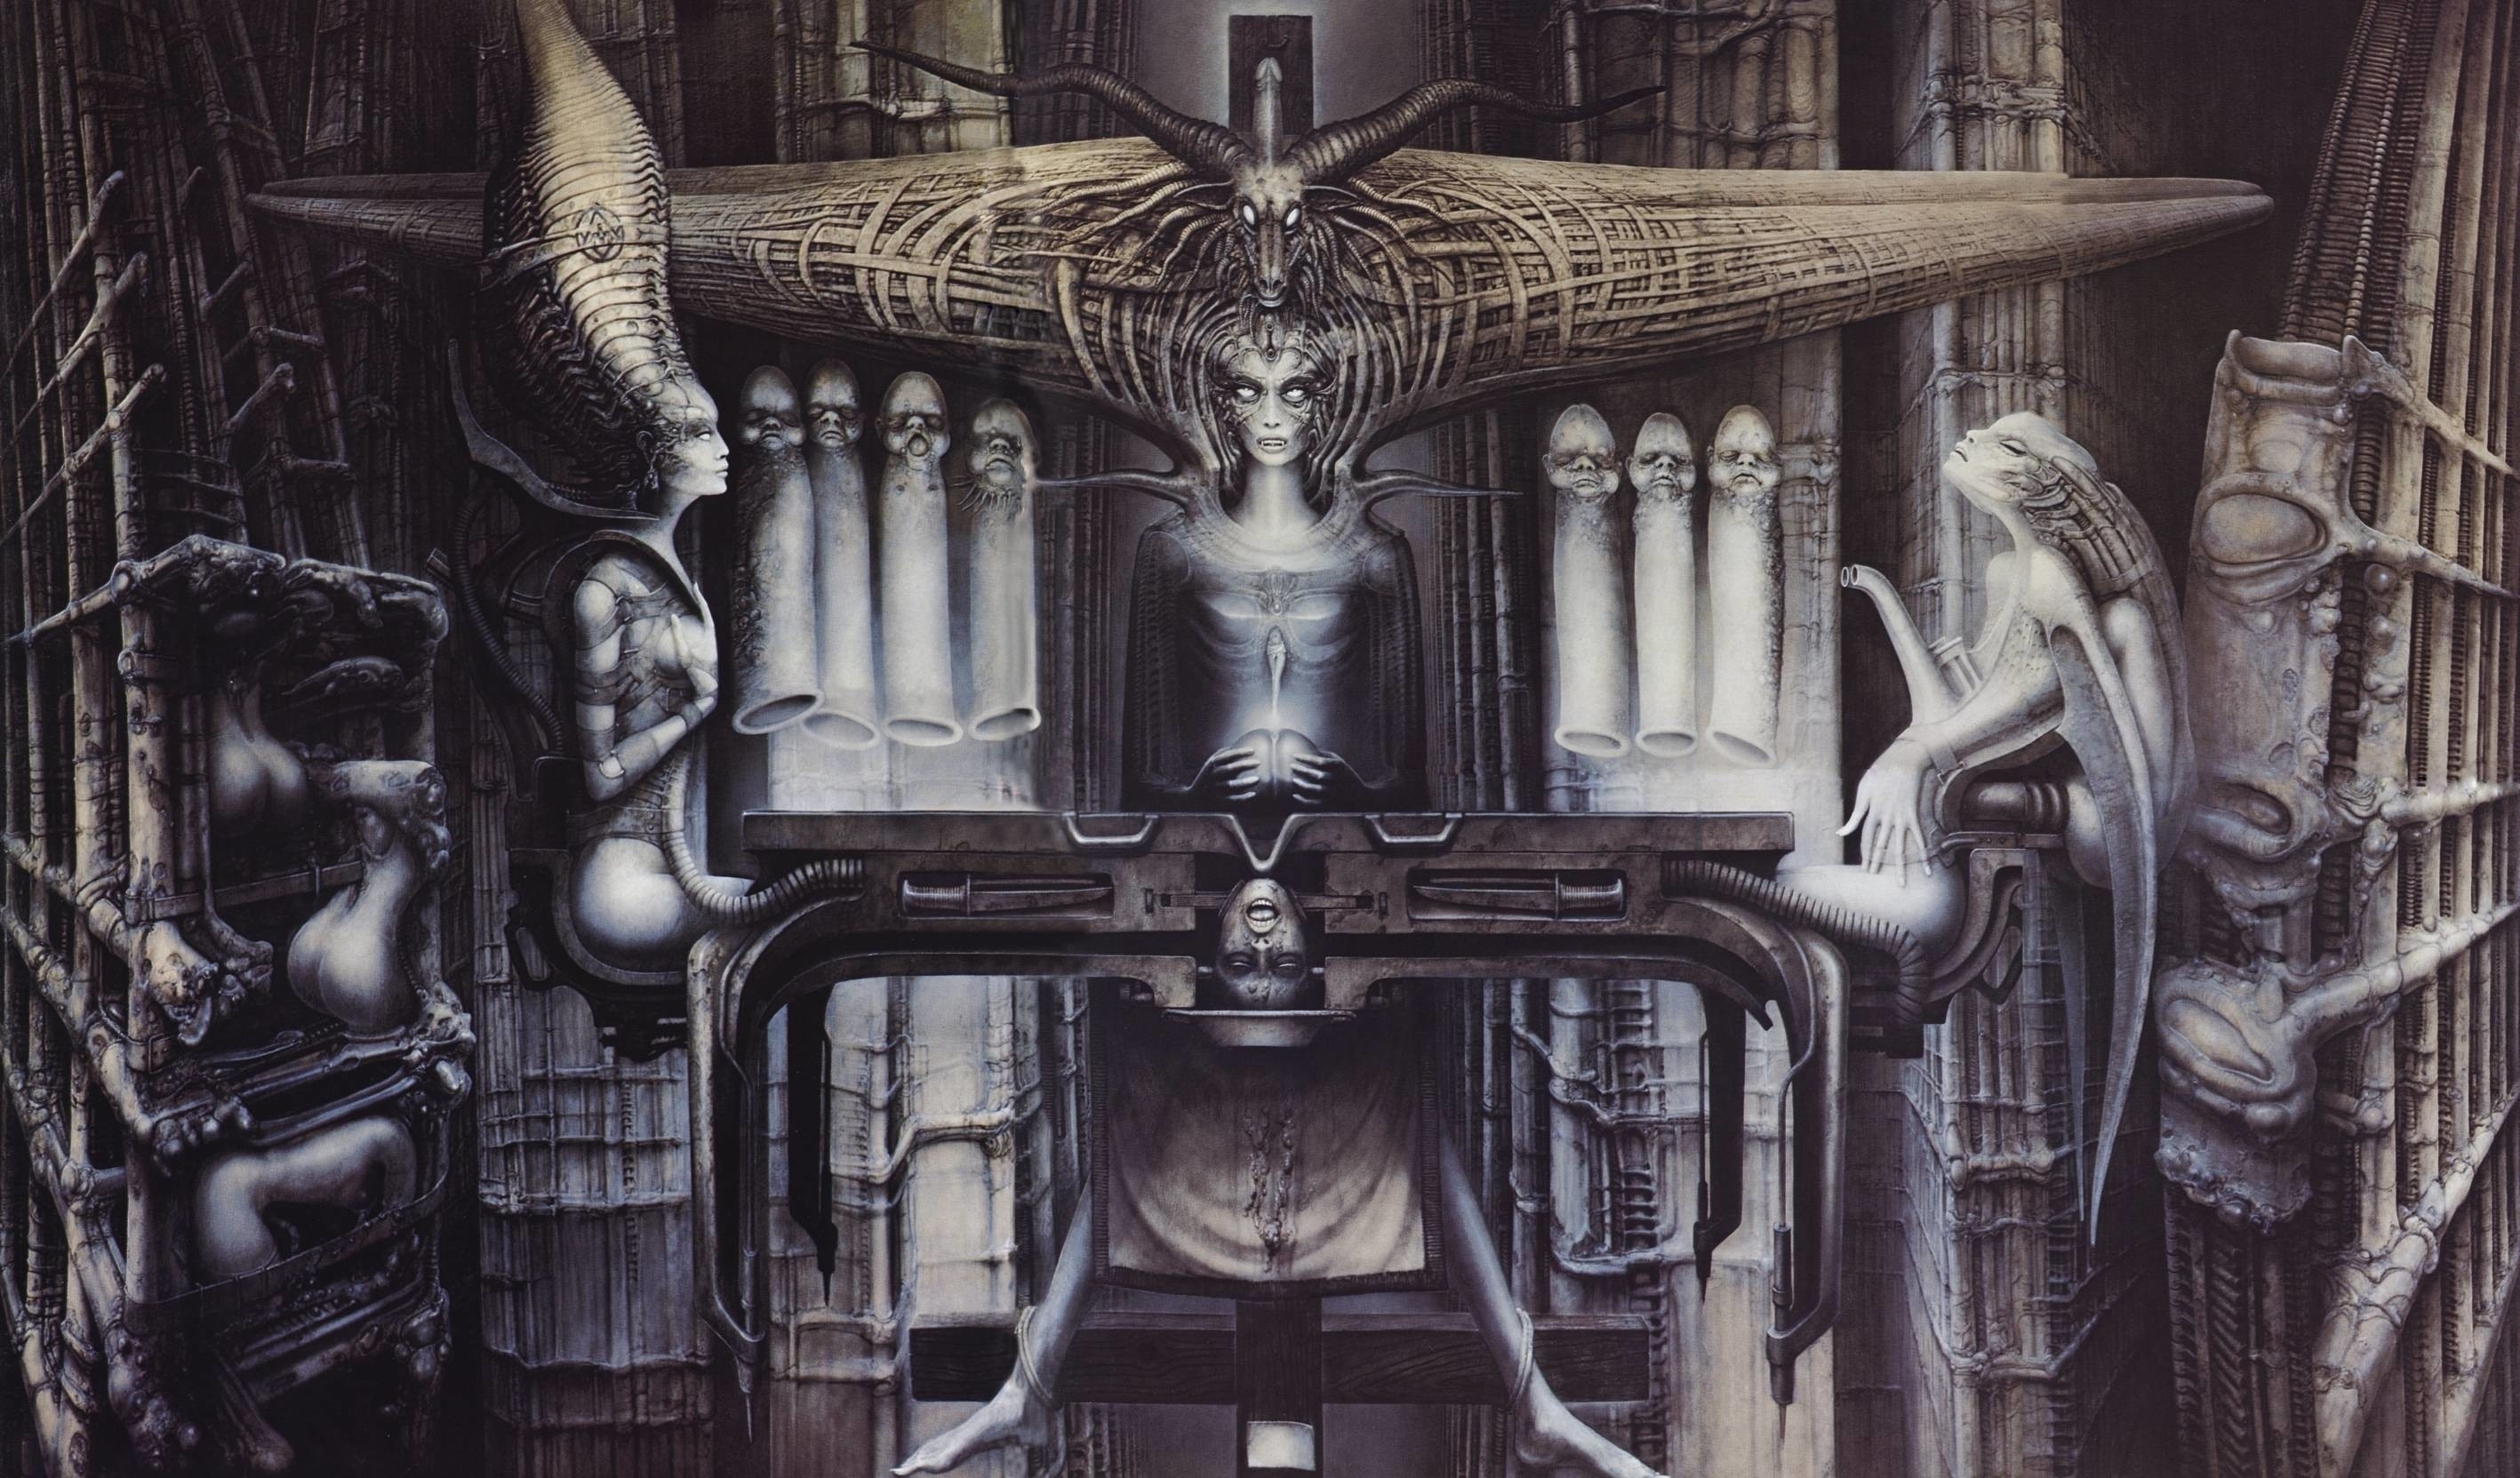 10 New H.r. Giger Wallpaper FULL HD 1080p For PC Background